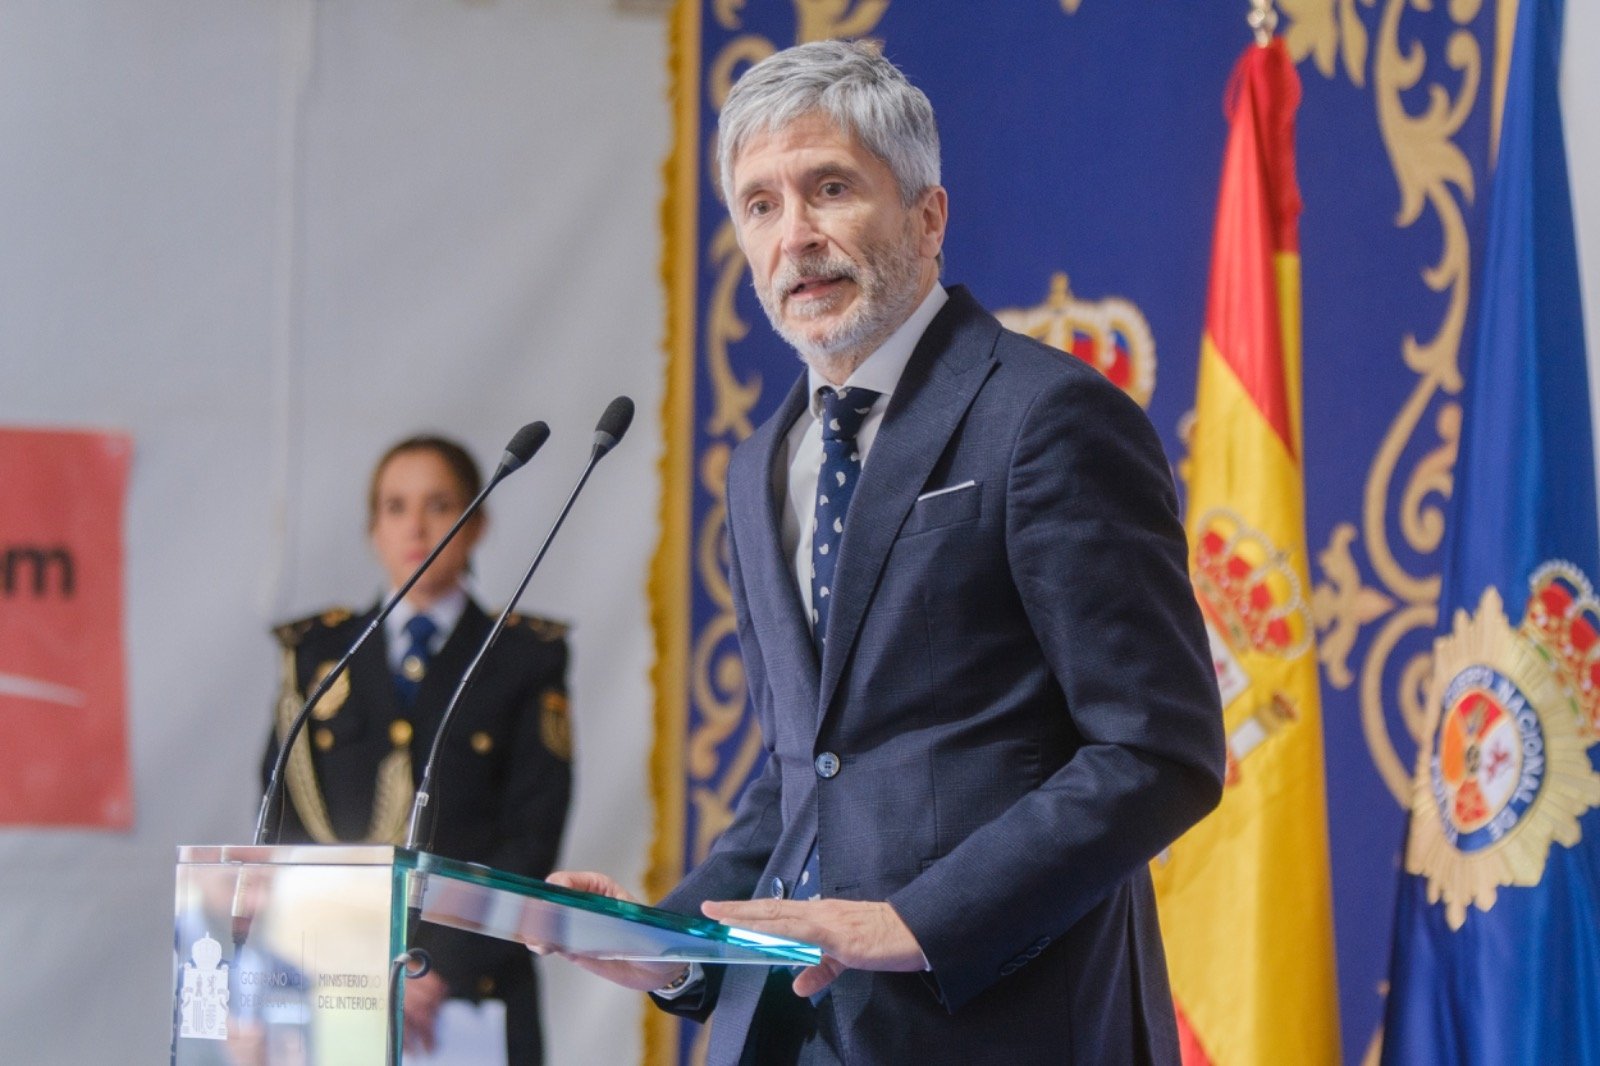 Spain-Morocco relationship is ‘loyal and privileged’, an ‘example of efficiency” – Interior Minister Grande-Marlaska